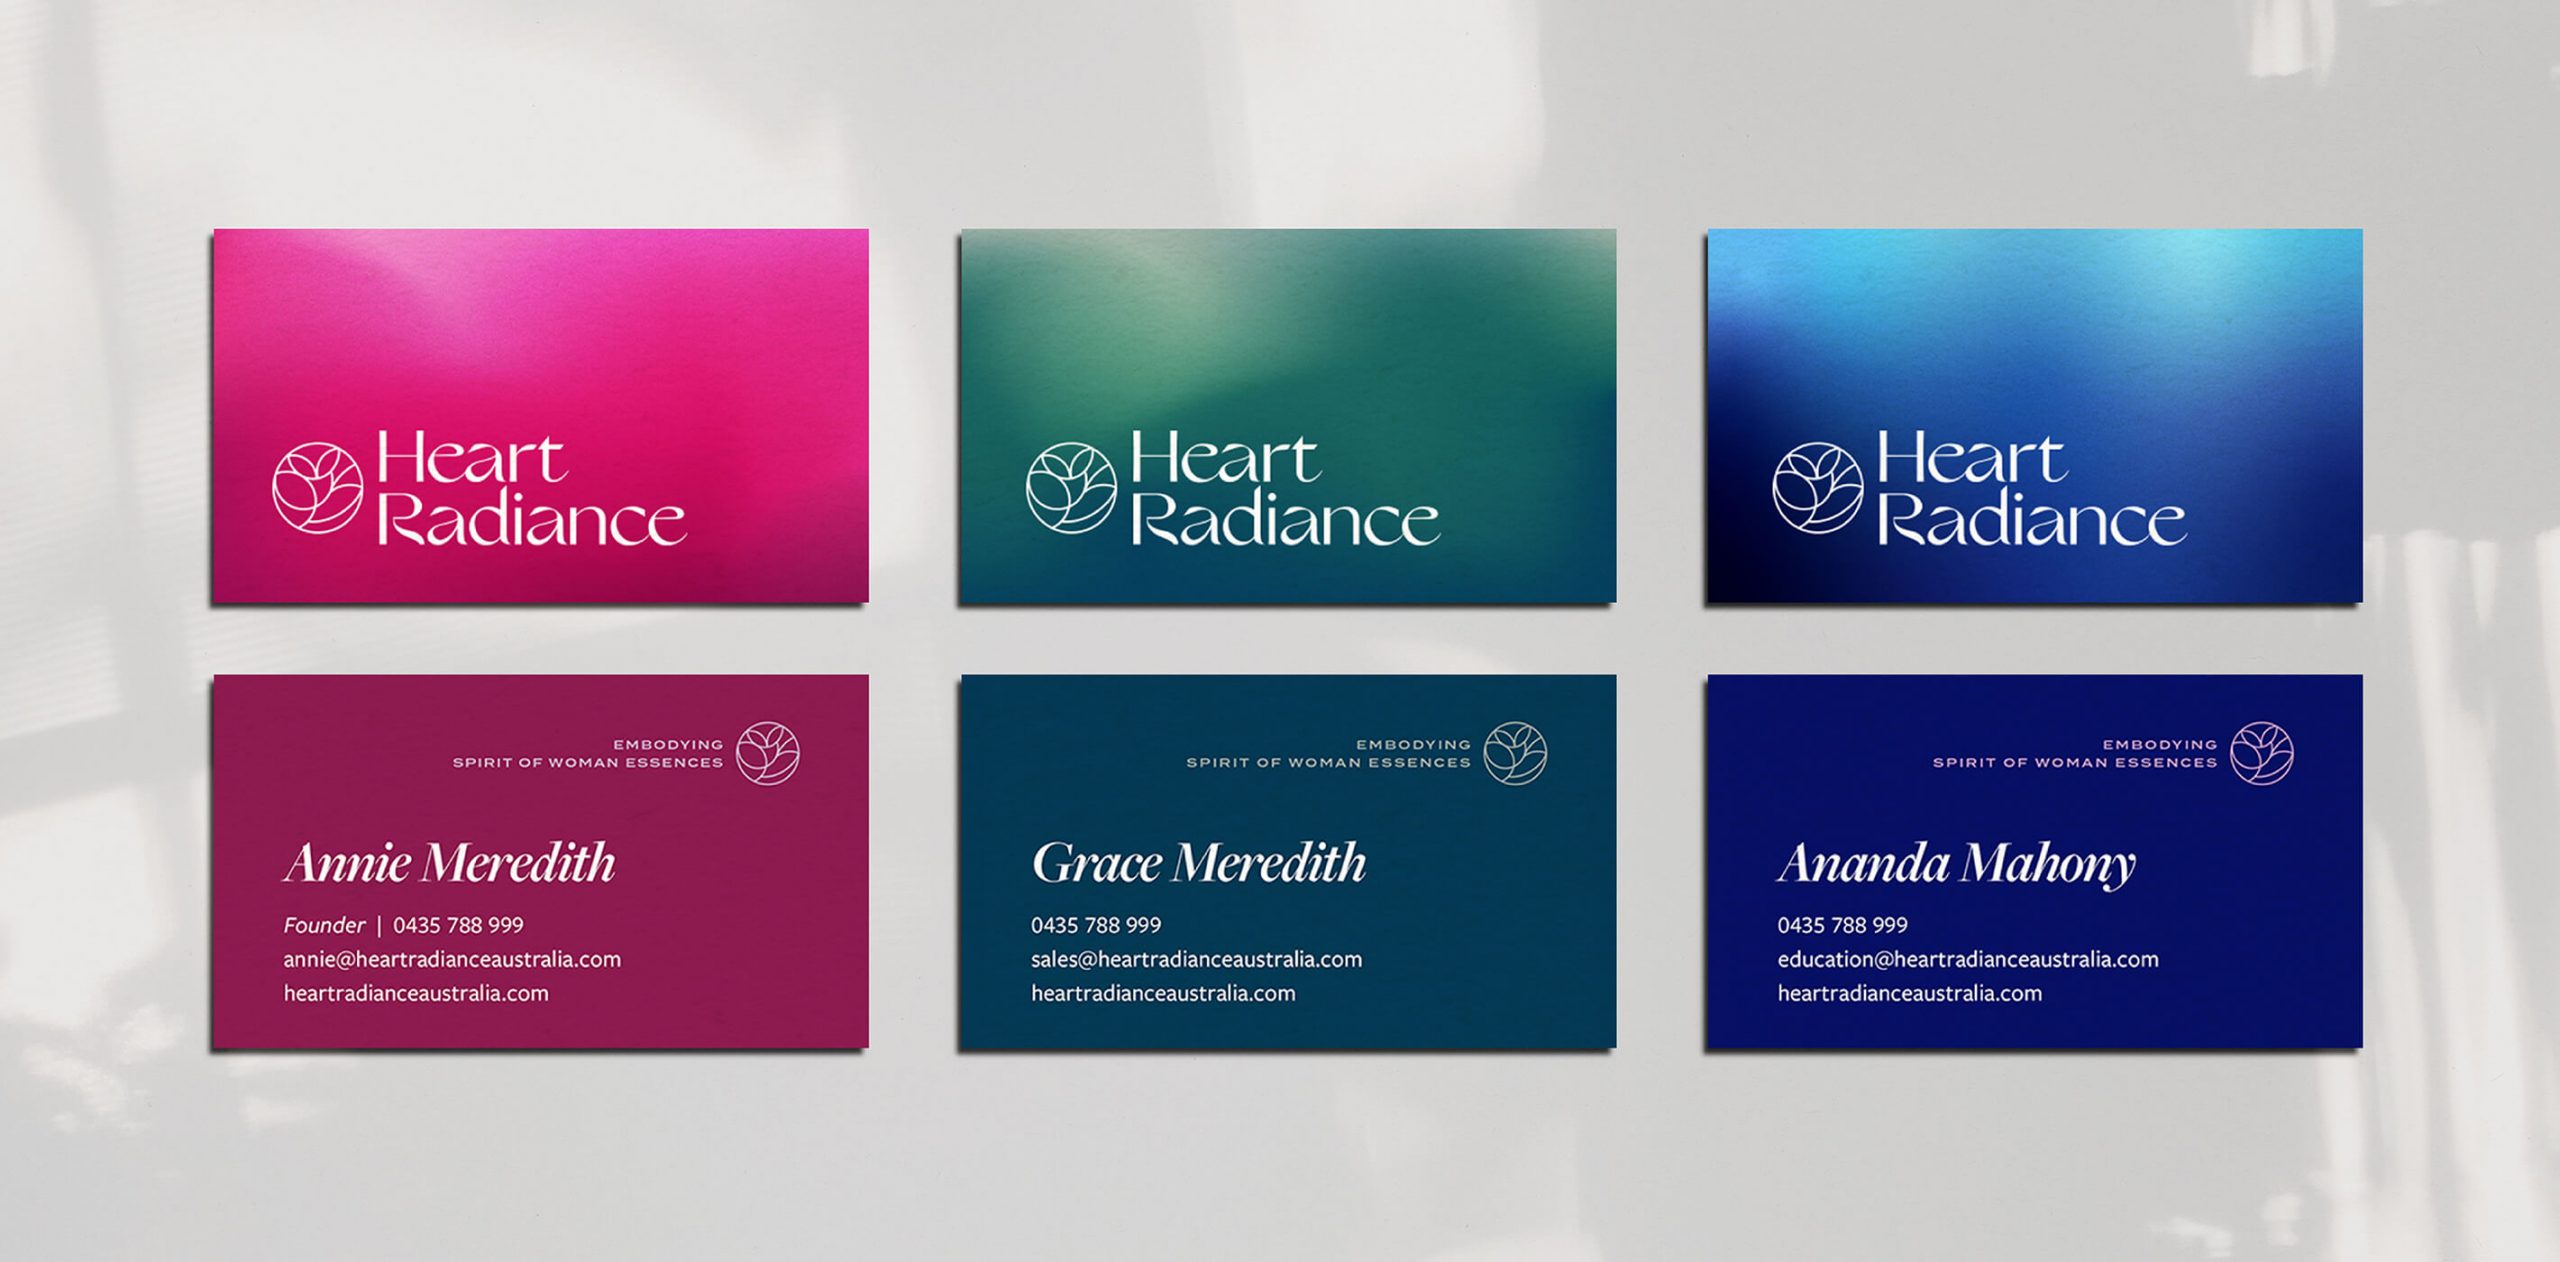 Rebranding case study image of the HeartRadiance business cards. Each card features the logo on one side and details on the other- each with a different of the brand gradients.